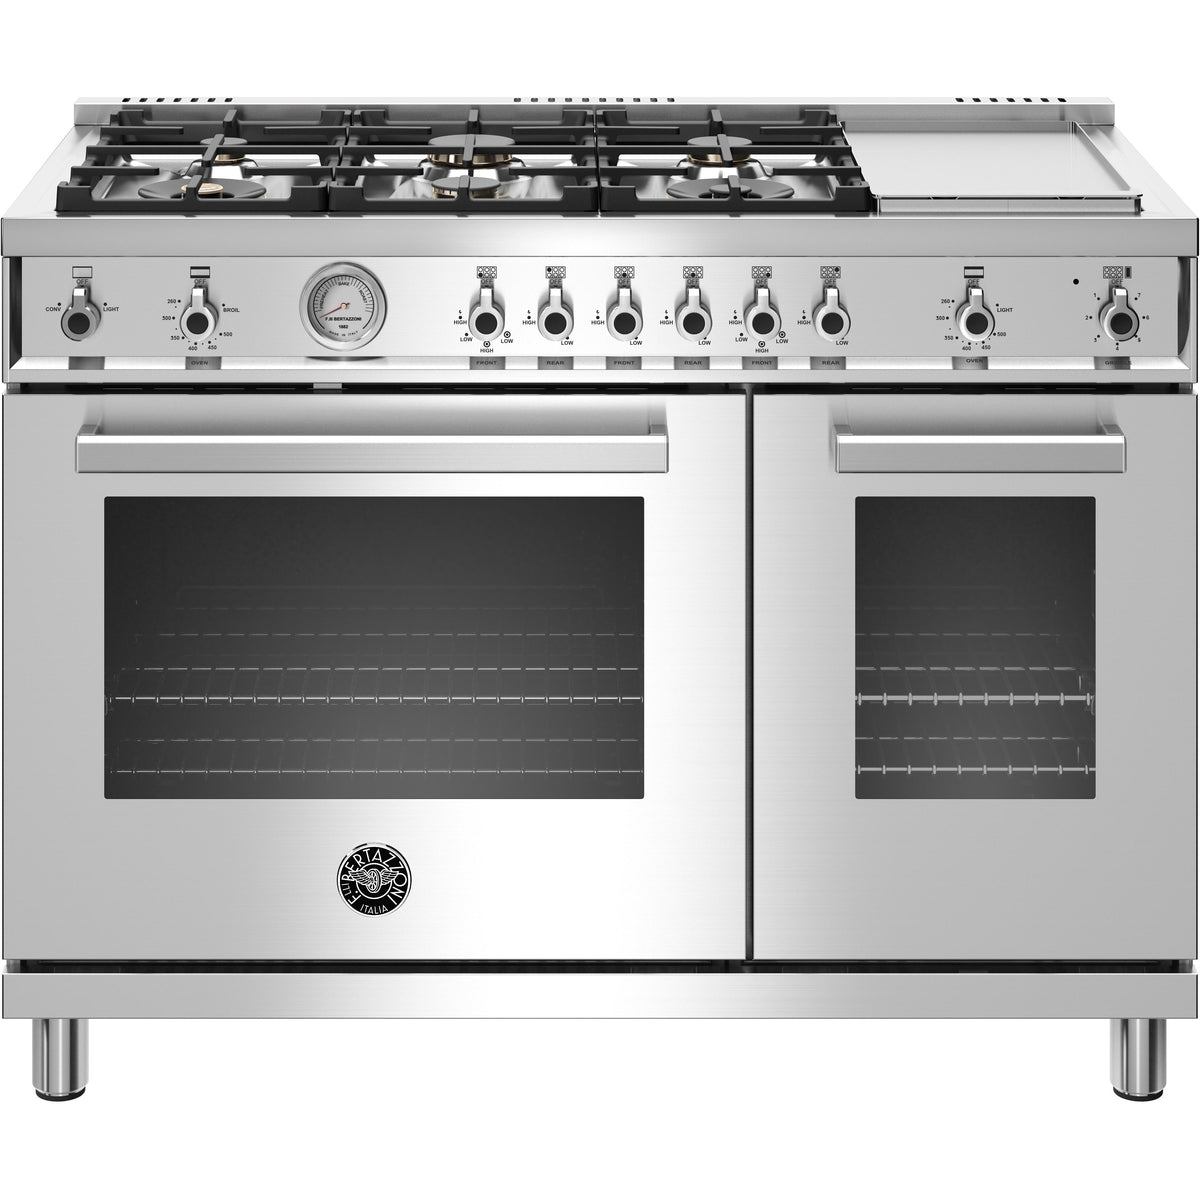 48-inch Freestanding Gas Range with Griddle PROF486GGASXT IMAGE 1